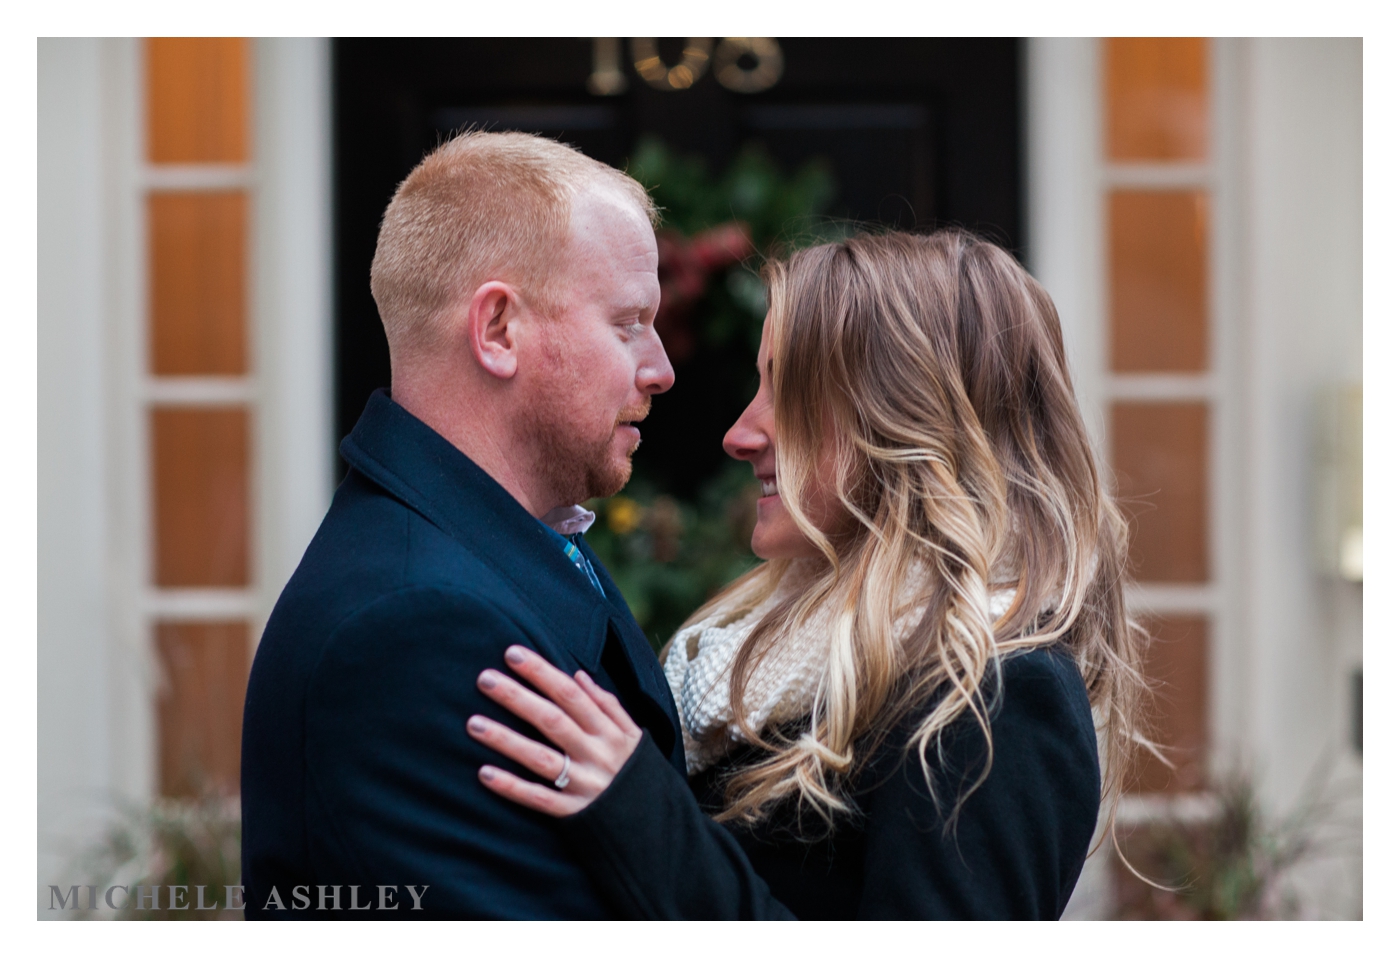 Boston Common and Beacon Hill Engagement Photographer